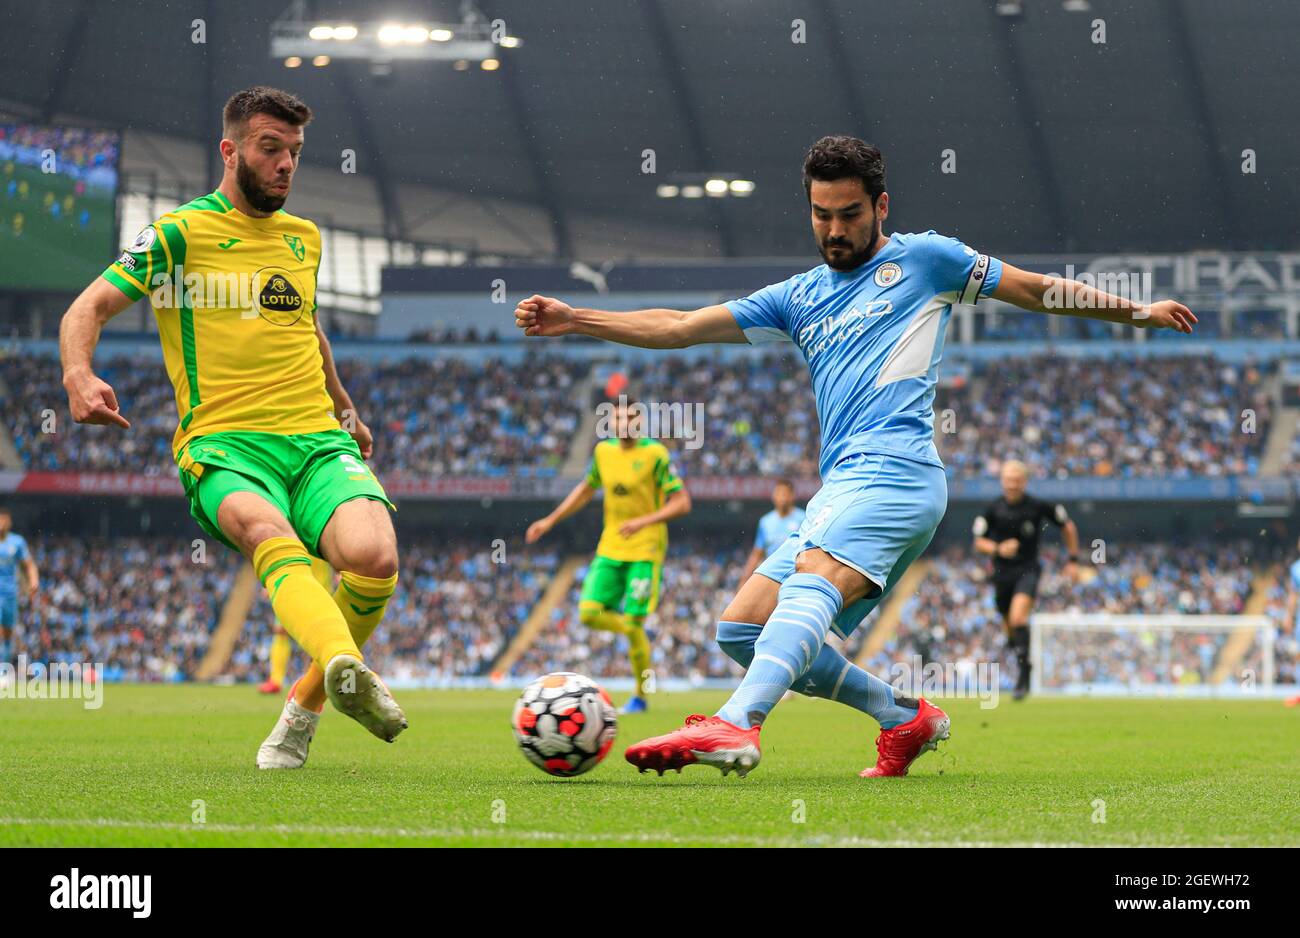 Ilkay Gundogan #8 of Manchester City crosses the ball watched by Grant Hanley #5 of Norwich City Stock Photo